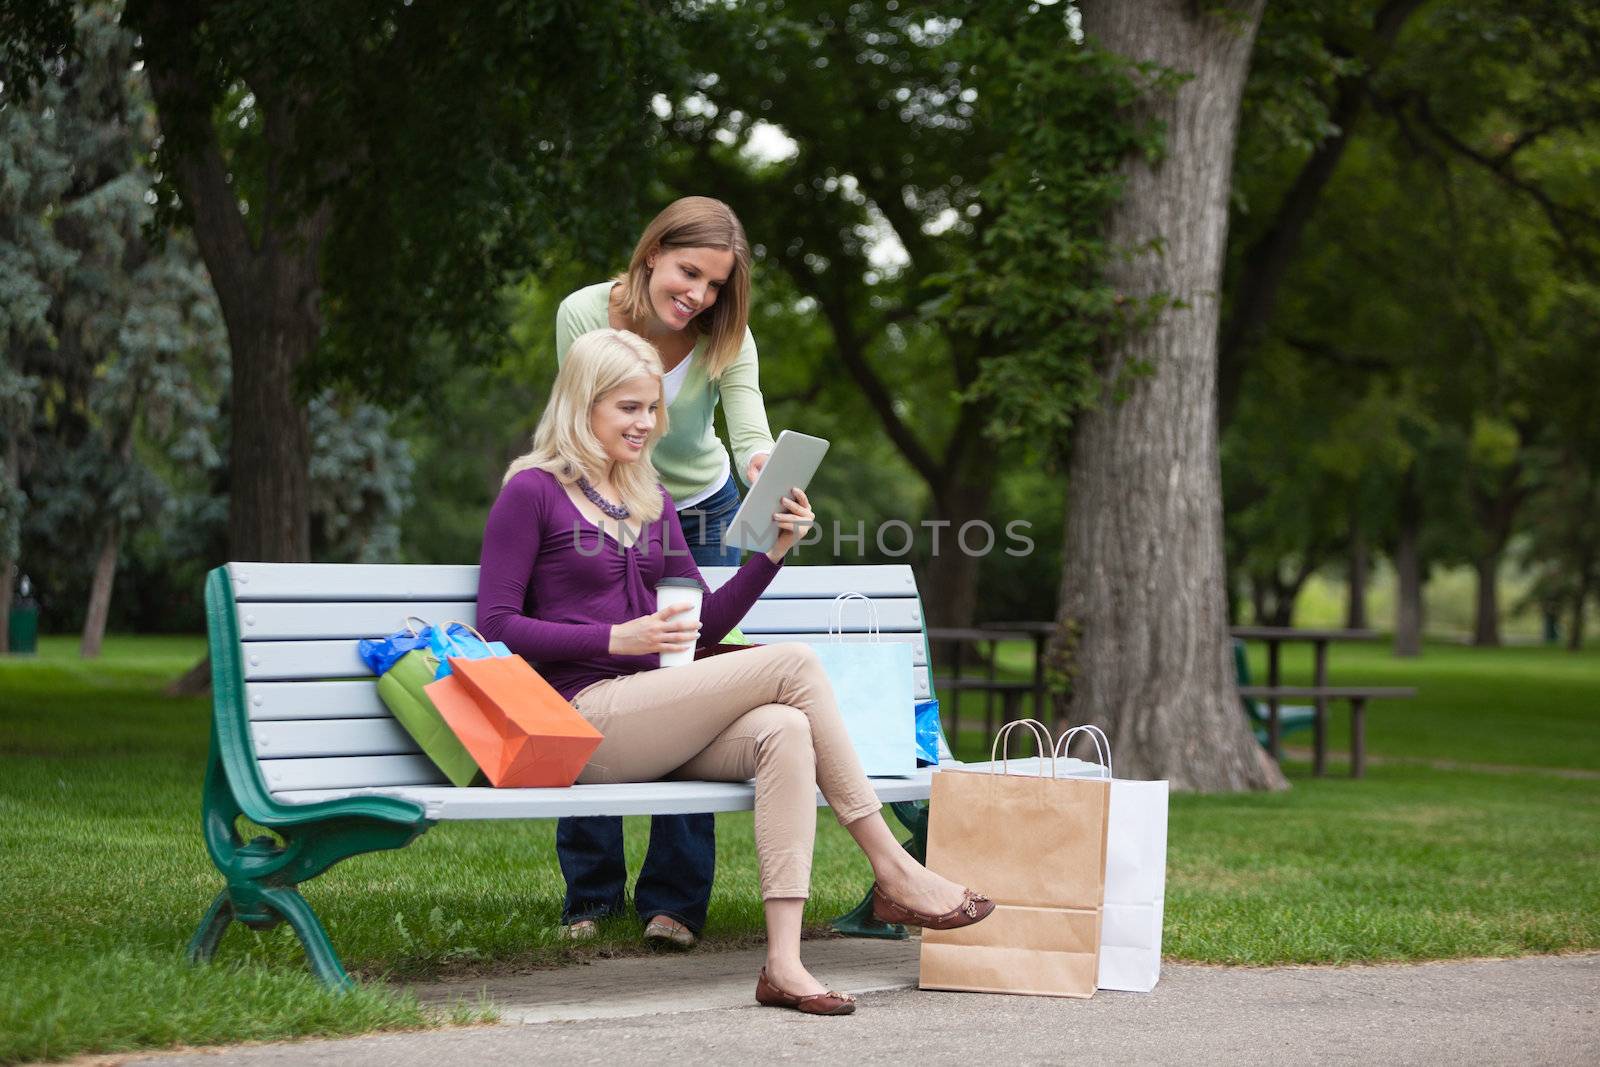 Women With Shopping Bags Using Tablet PC At Park by leaf